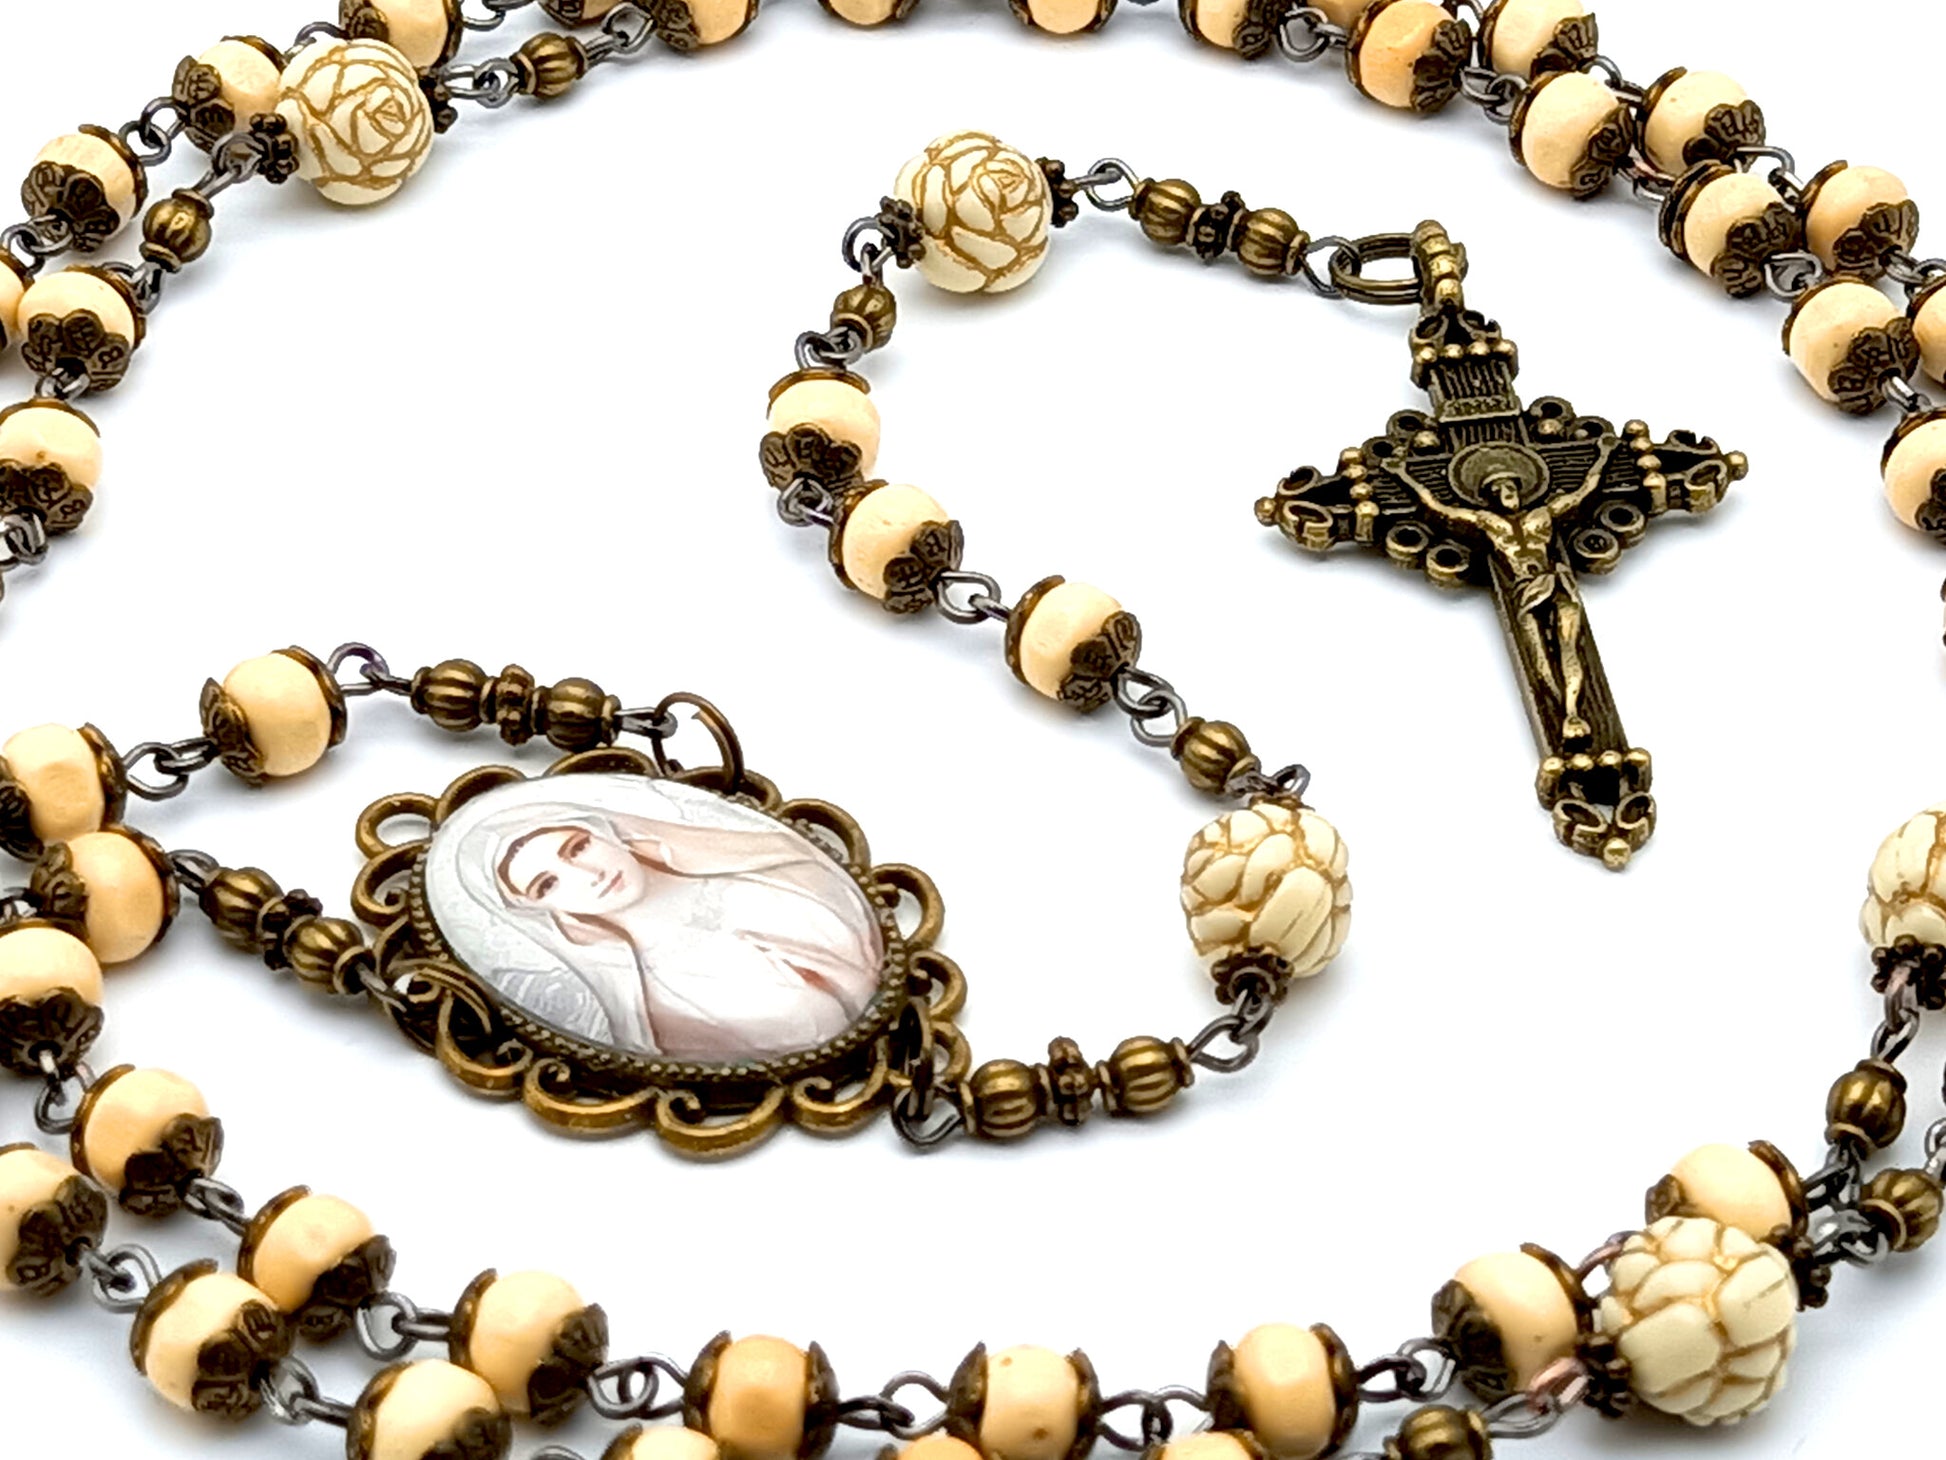 Vintage style Virgin Mary unique rosary beads with wooden and rose beads and filigree brass crucifix.